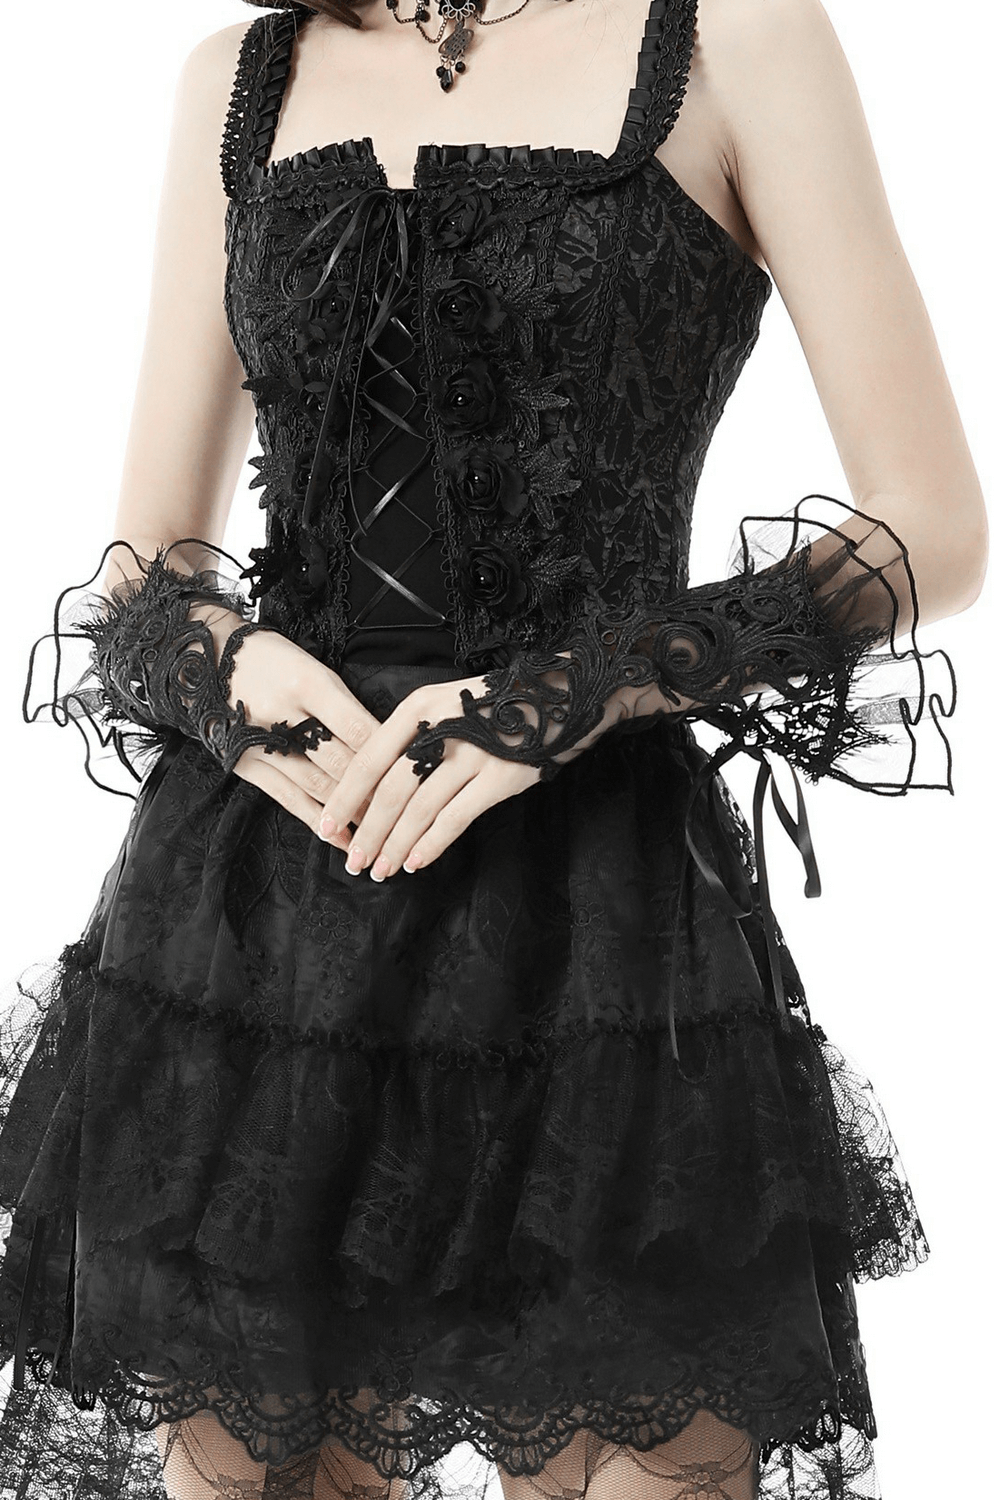 Black Floral Lace Fingerless Gloves for Evening Events